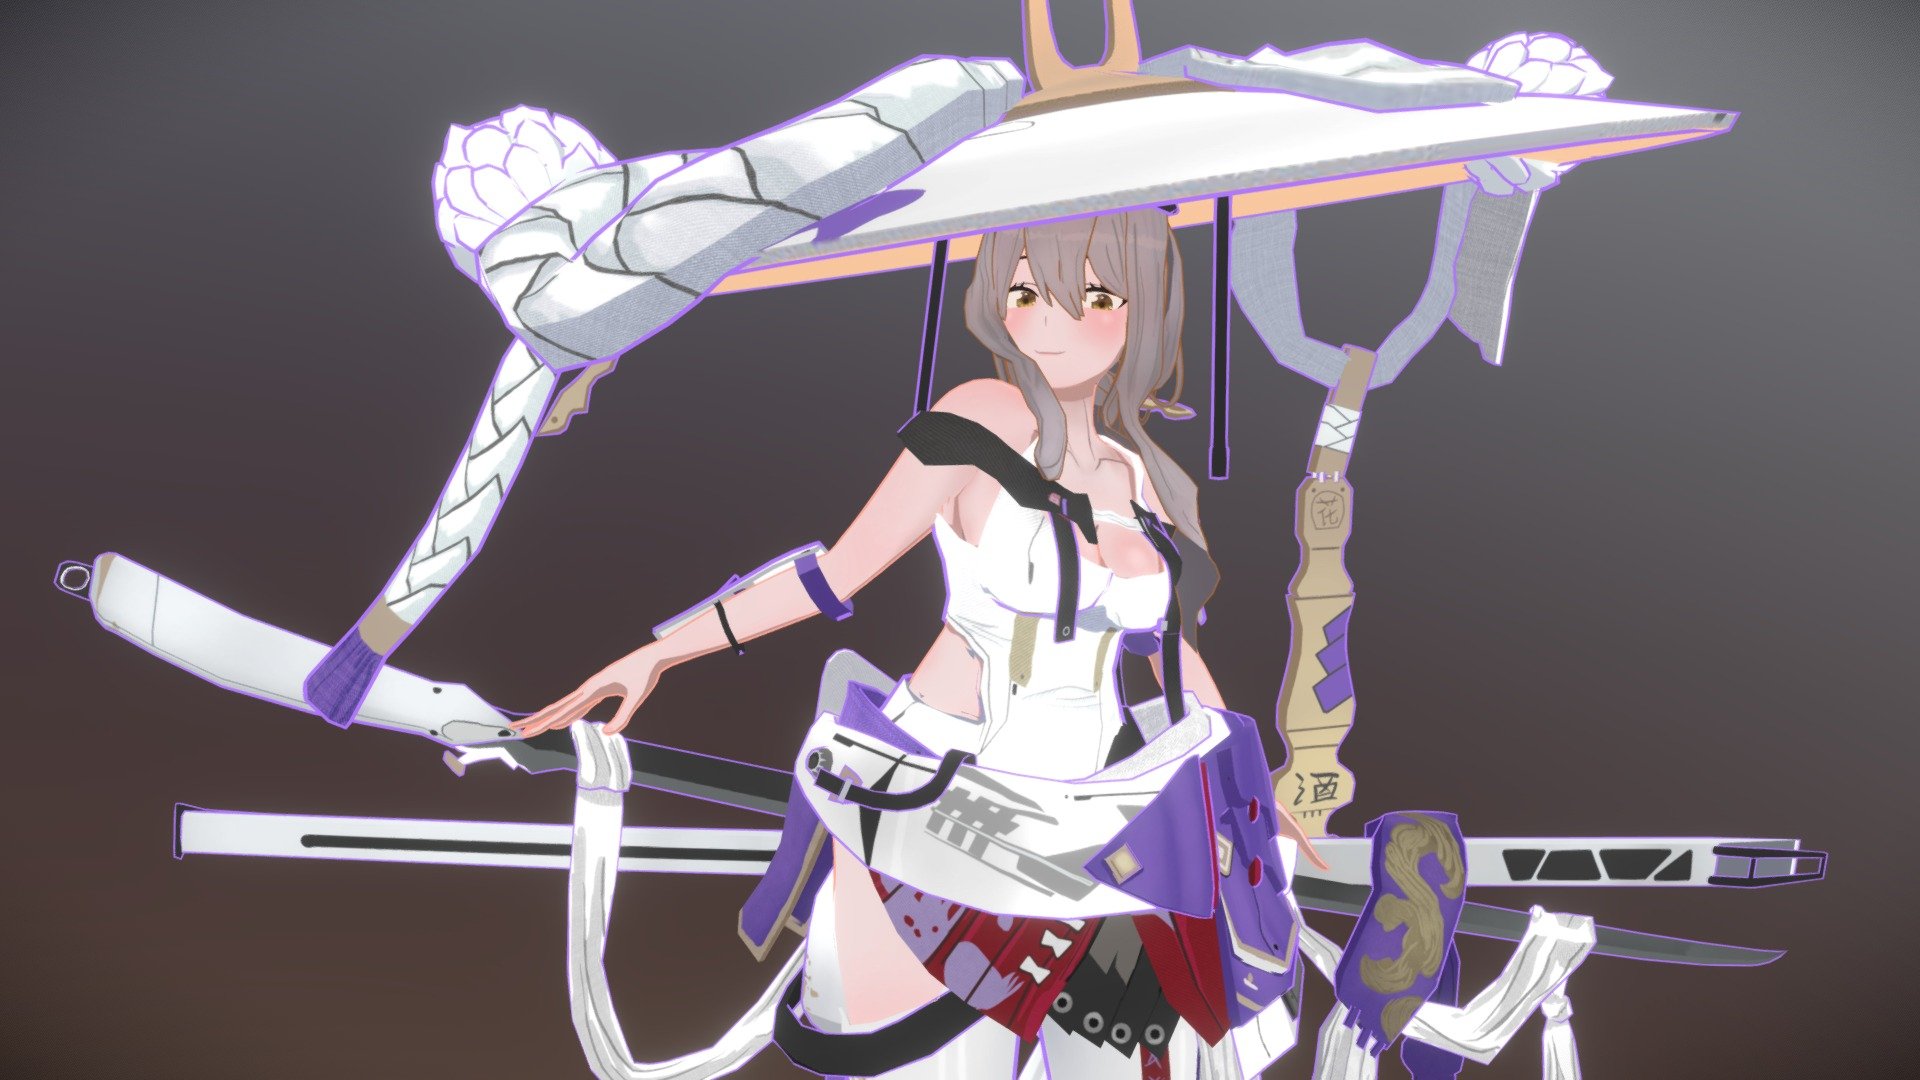 Hello, this is a 3D fanart of my favorite character in Nikke: Goddess of Victory, Hope you like it!

A wandering swordswoman from Pioneer. With no one place to call home, she walks the land alone, seeking to reclaim the land from the Raptures one cut at a time. As a result of wandering by herself for the most part, she's become very adept in foraging and crafting sustenance on the surface 3d model